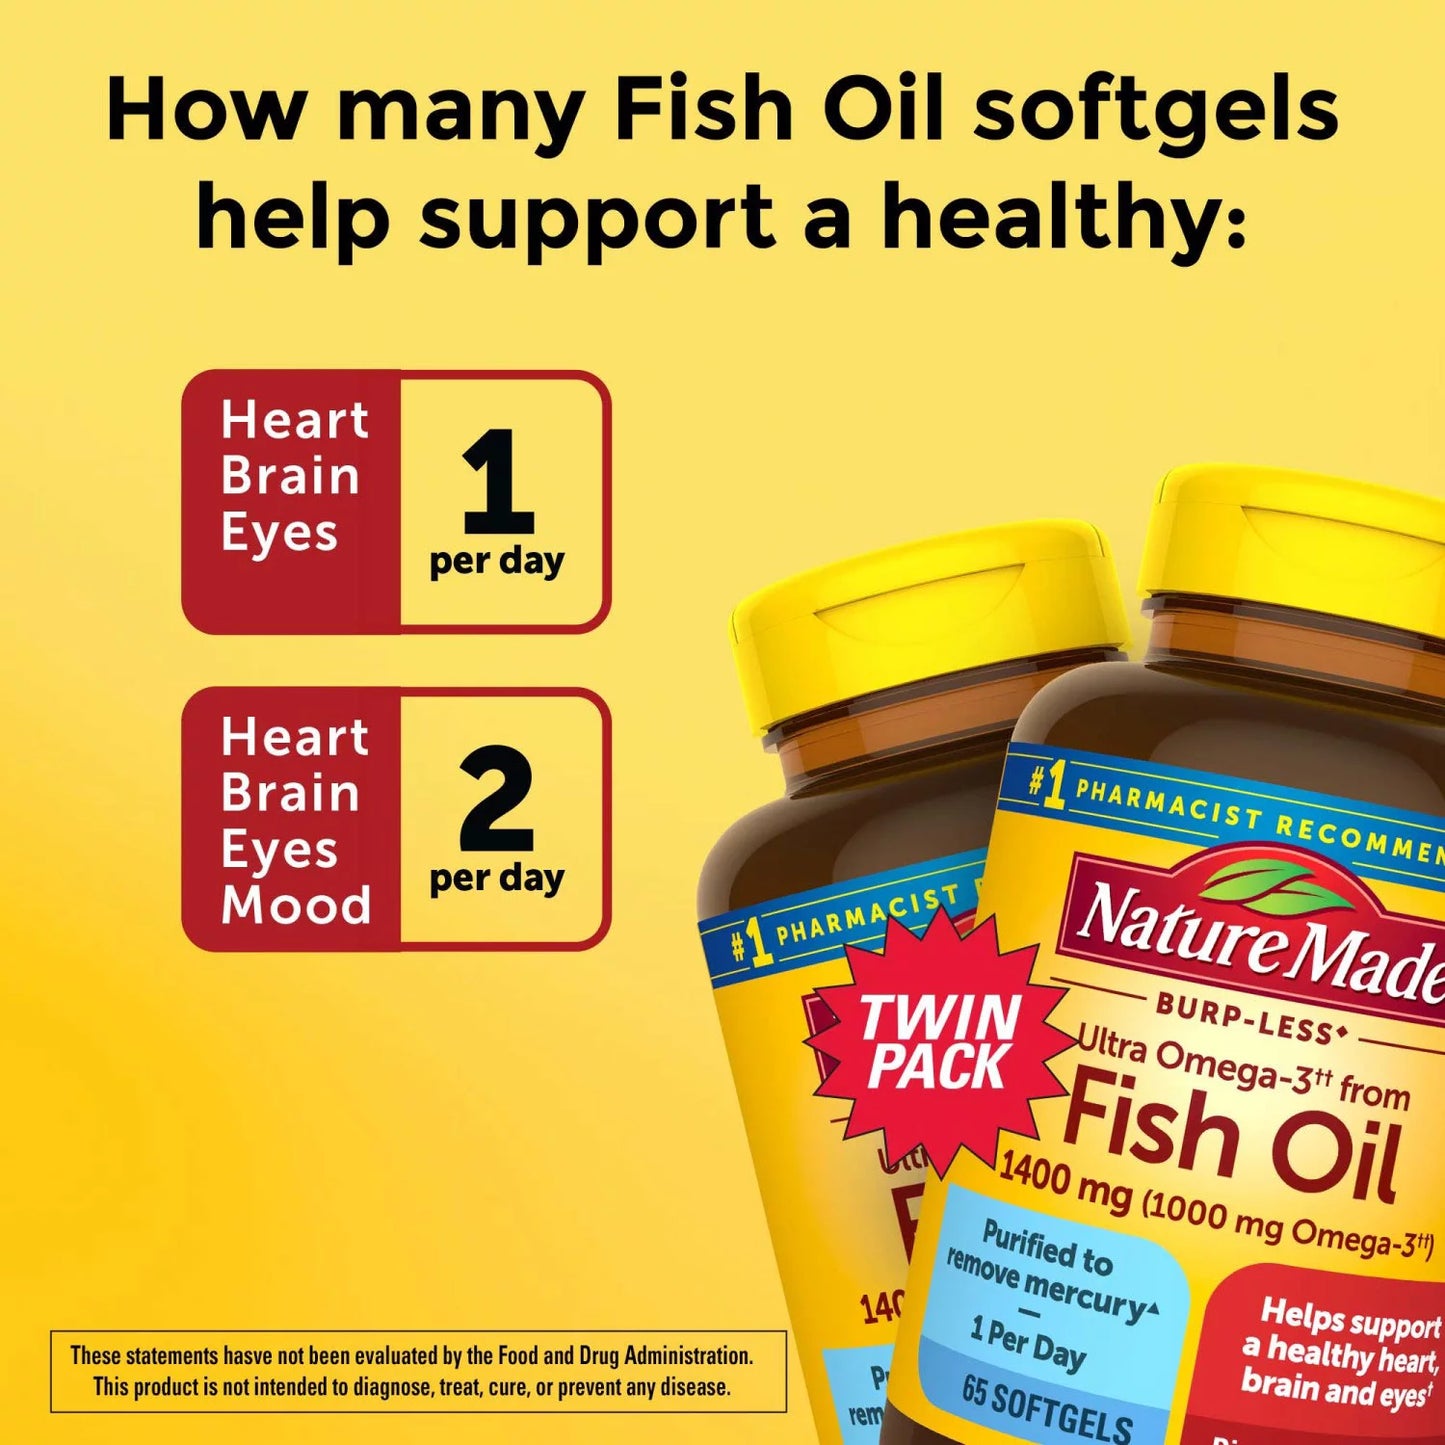 Nature Made Burp-Less Ultra Omega 3 from Fish Oil 1400 mg. Softgels (65 ct., 2pk.)